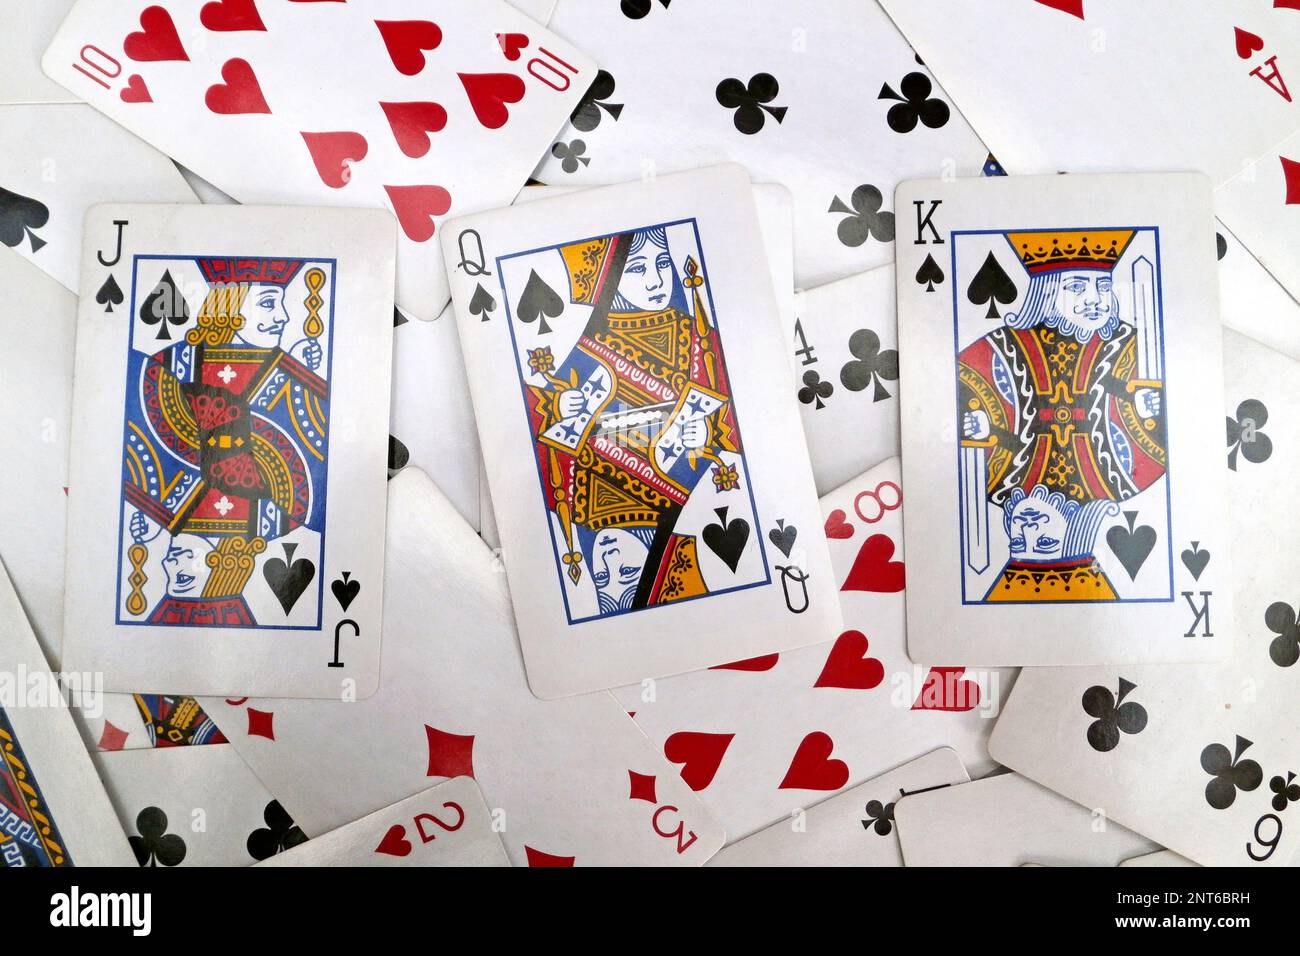 Ace of clubs, king of diamonds, queen of spades, and jack of hearts playing  cards on wood table Stock Photo - Alamy